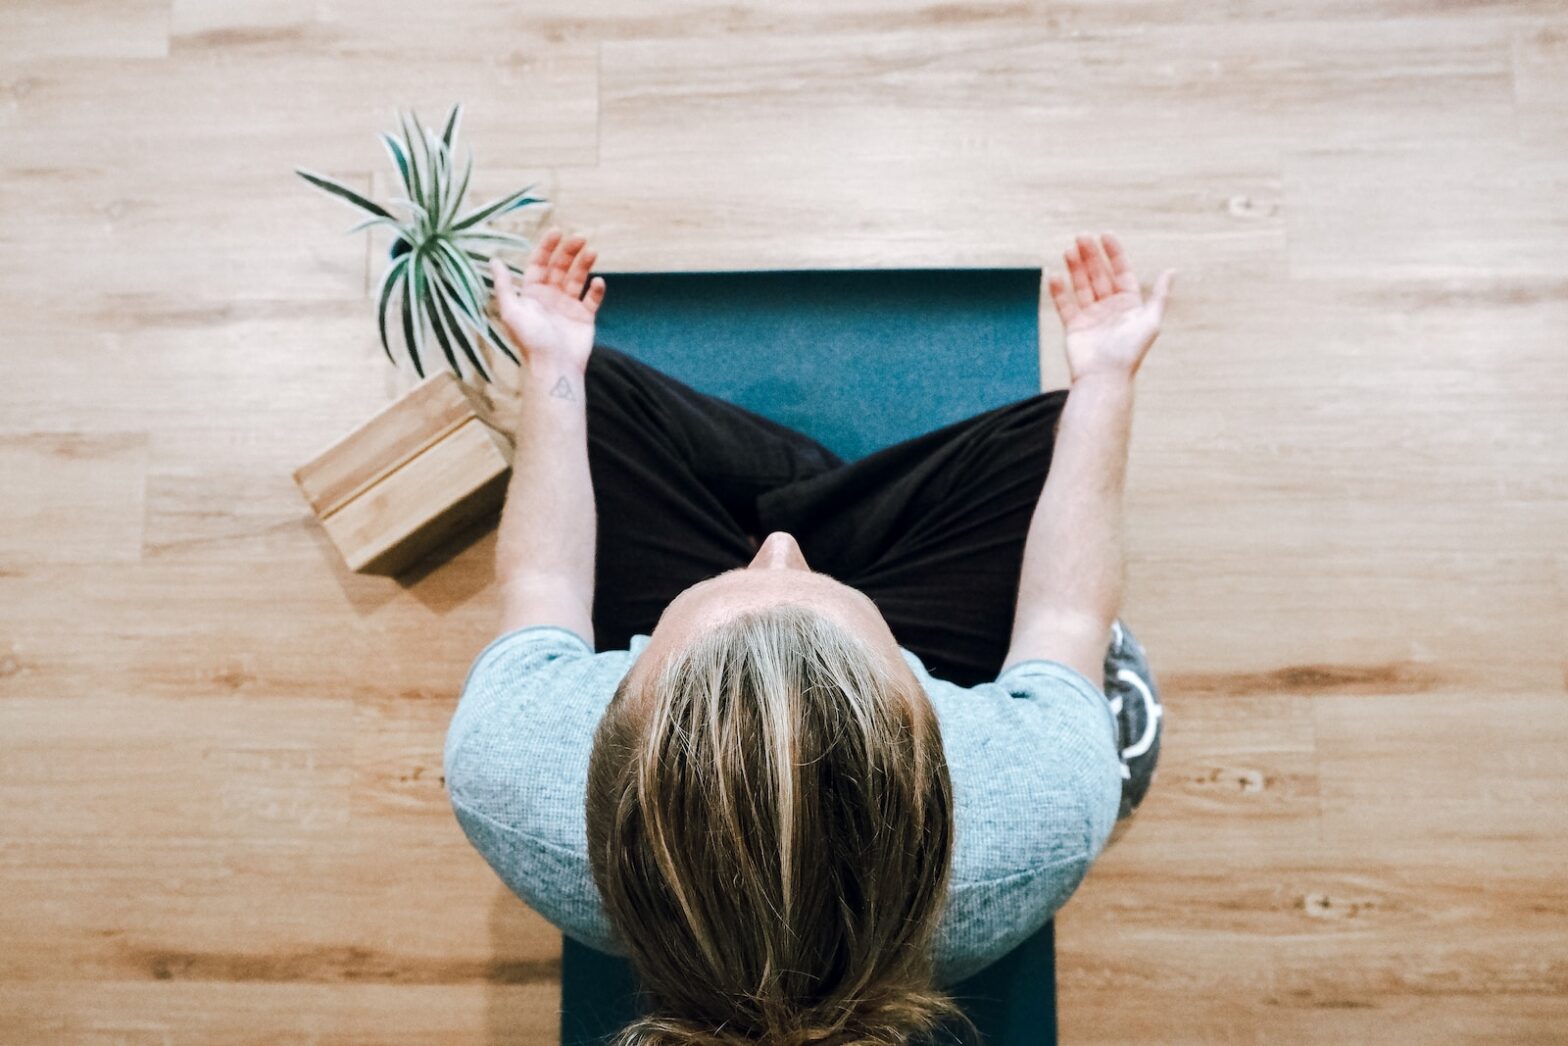 Can Yoga Nidra Replace Sleep? woman in black shirt and gray pants sitting on brown wooden bench